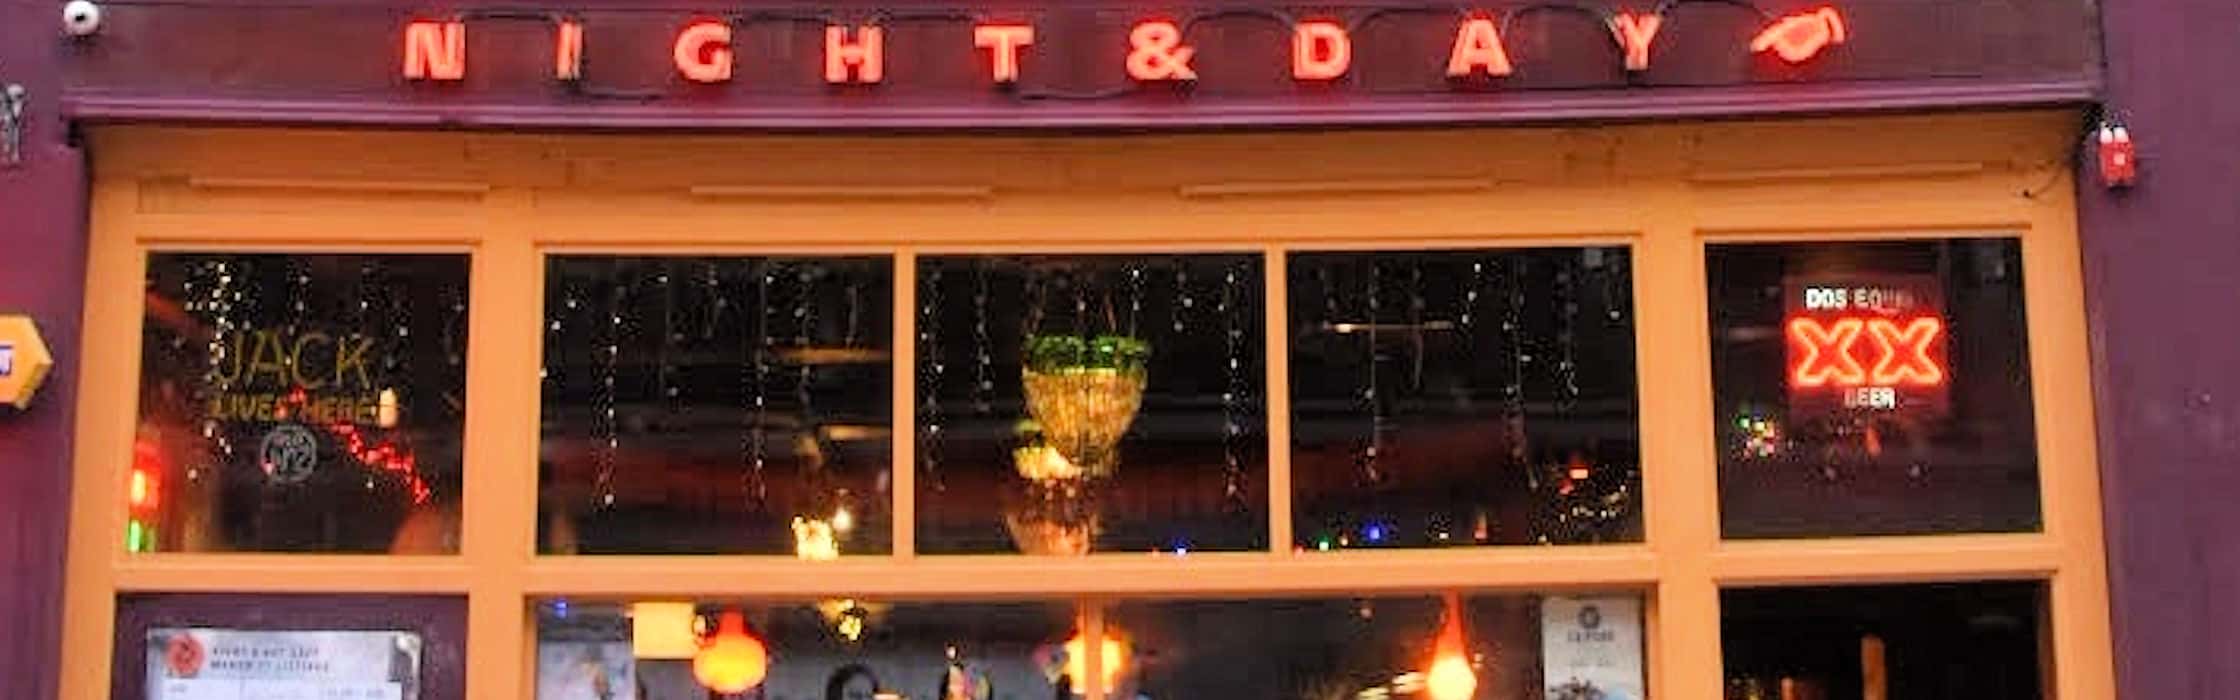 What's On at Night & Day Cafe, Manchester